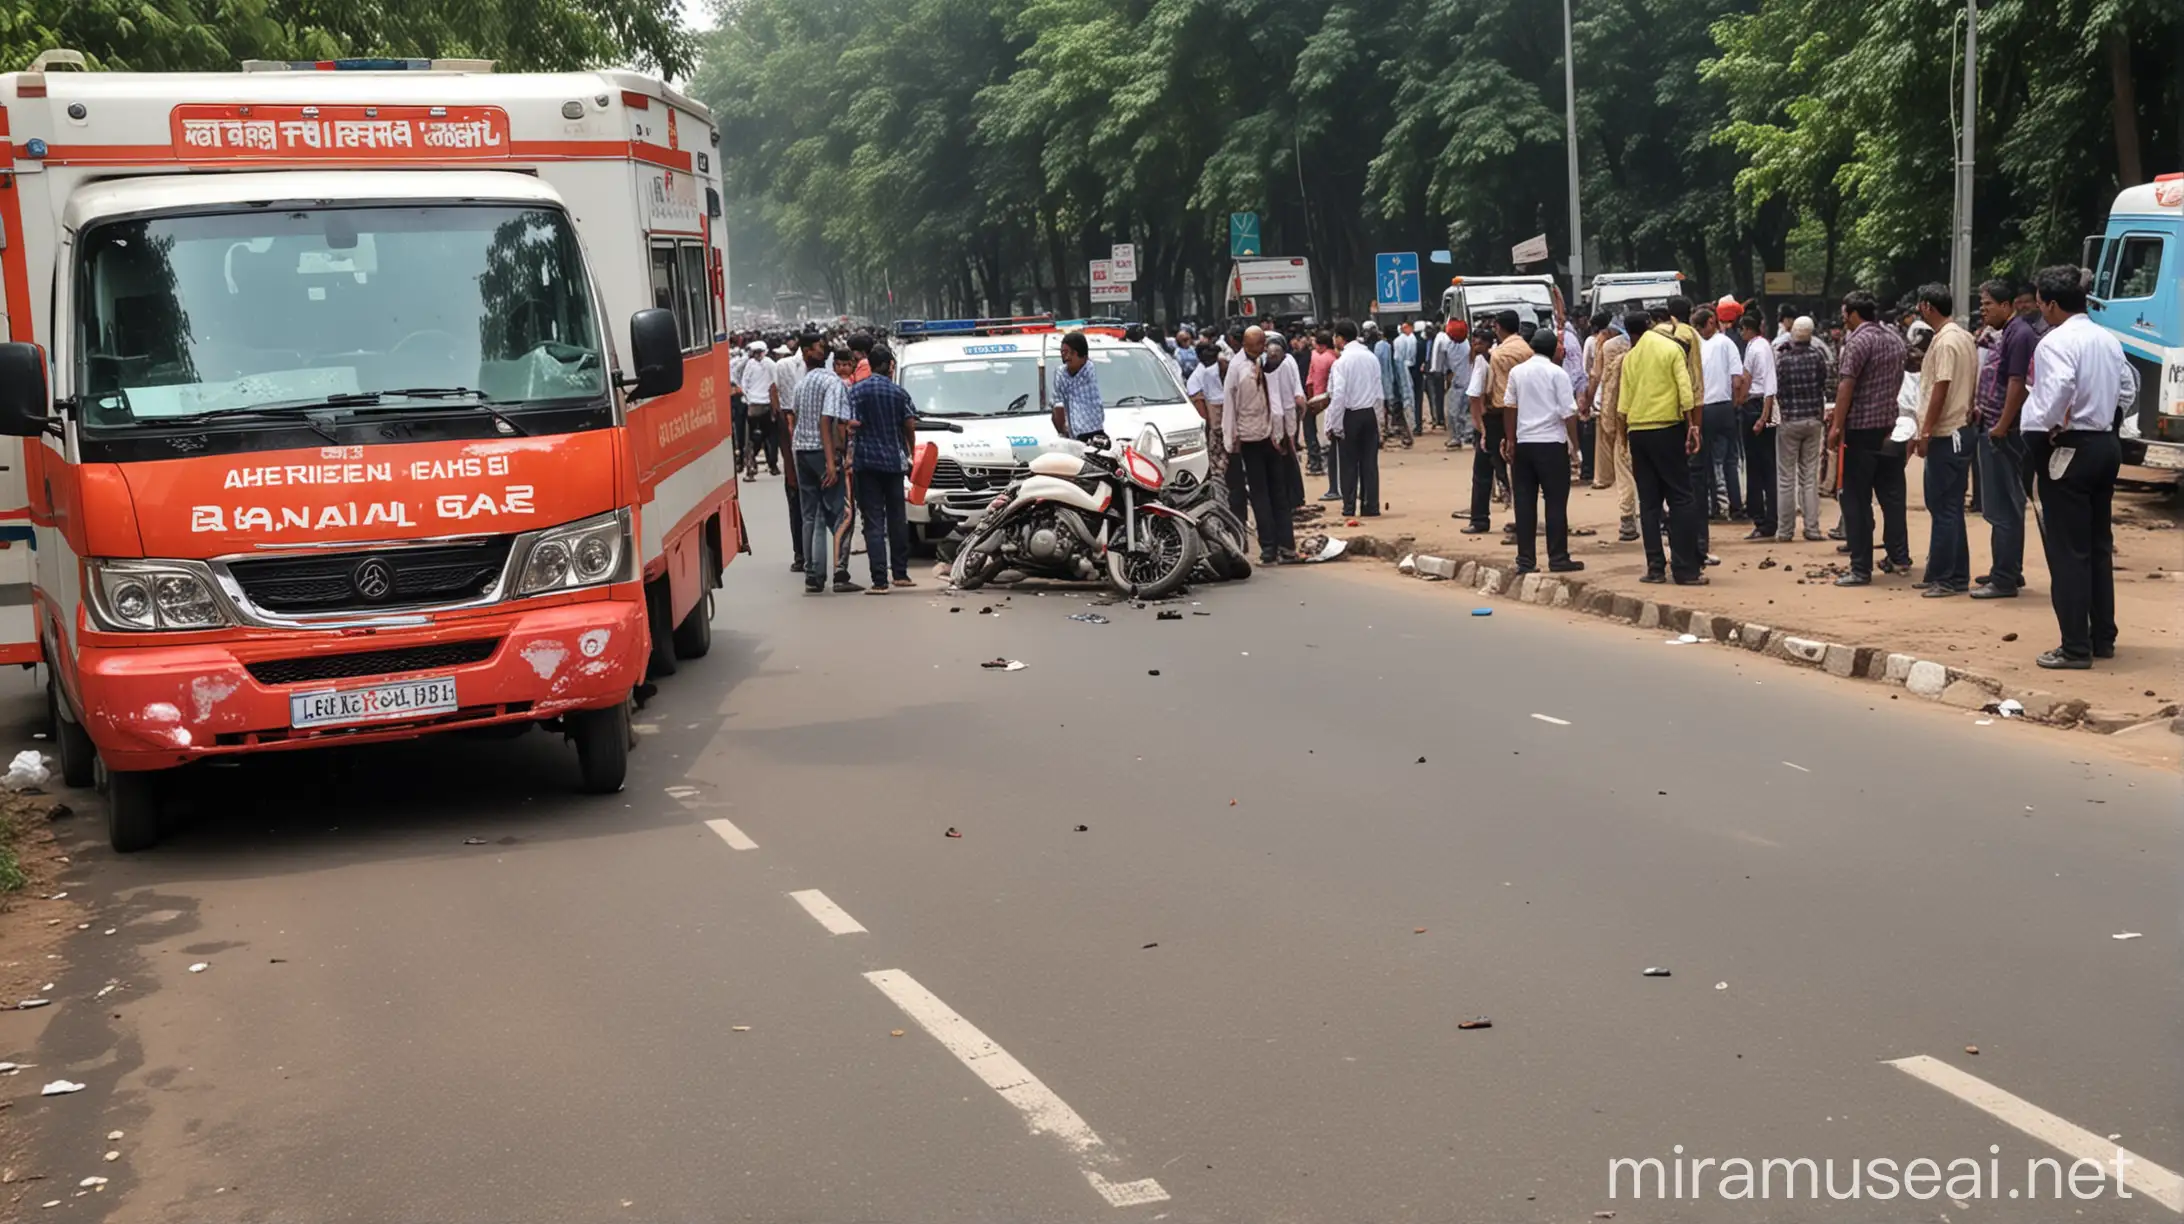 bike accident on indian road, one ambulance standing near by, some people gather